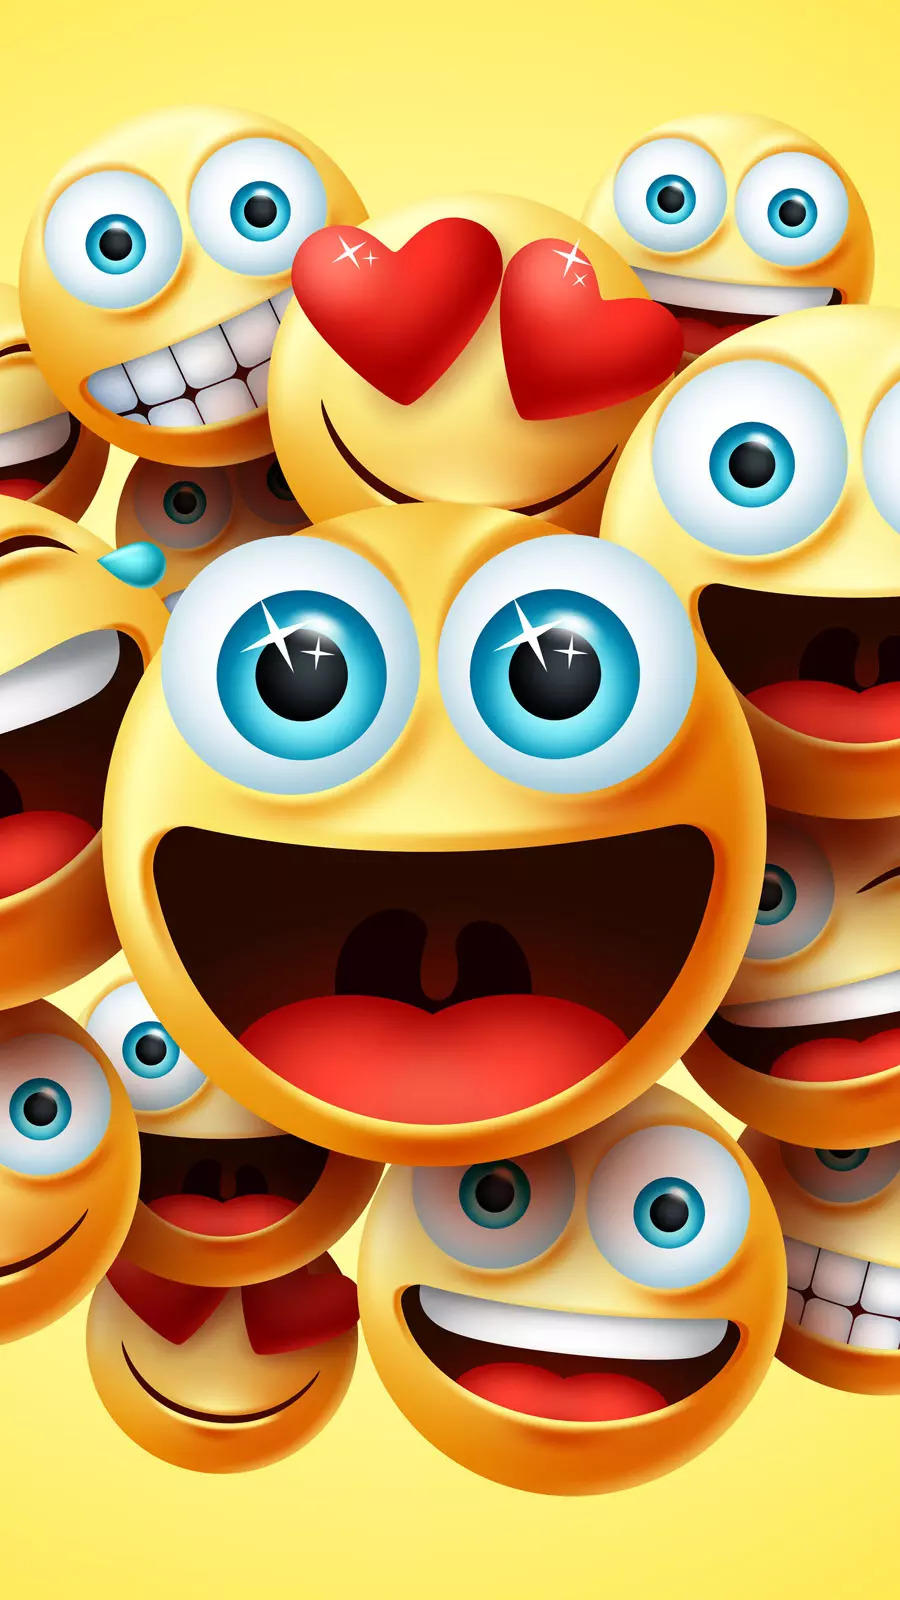 World Emoji Day 2022: Here're some commonly used ones | EconomicTimes